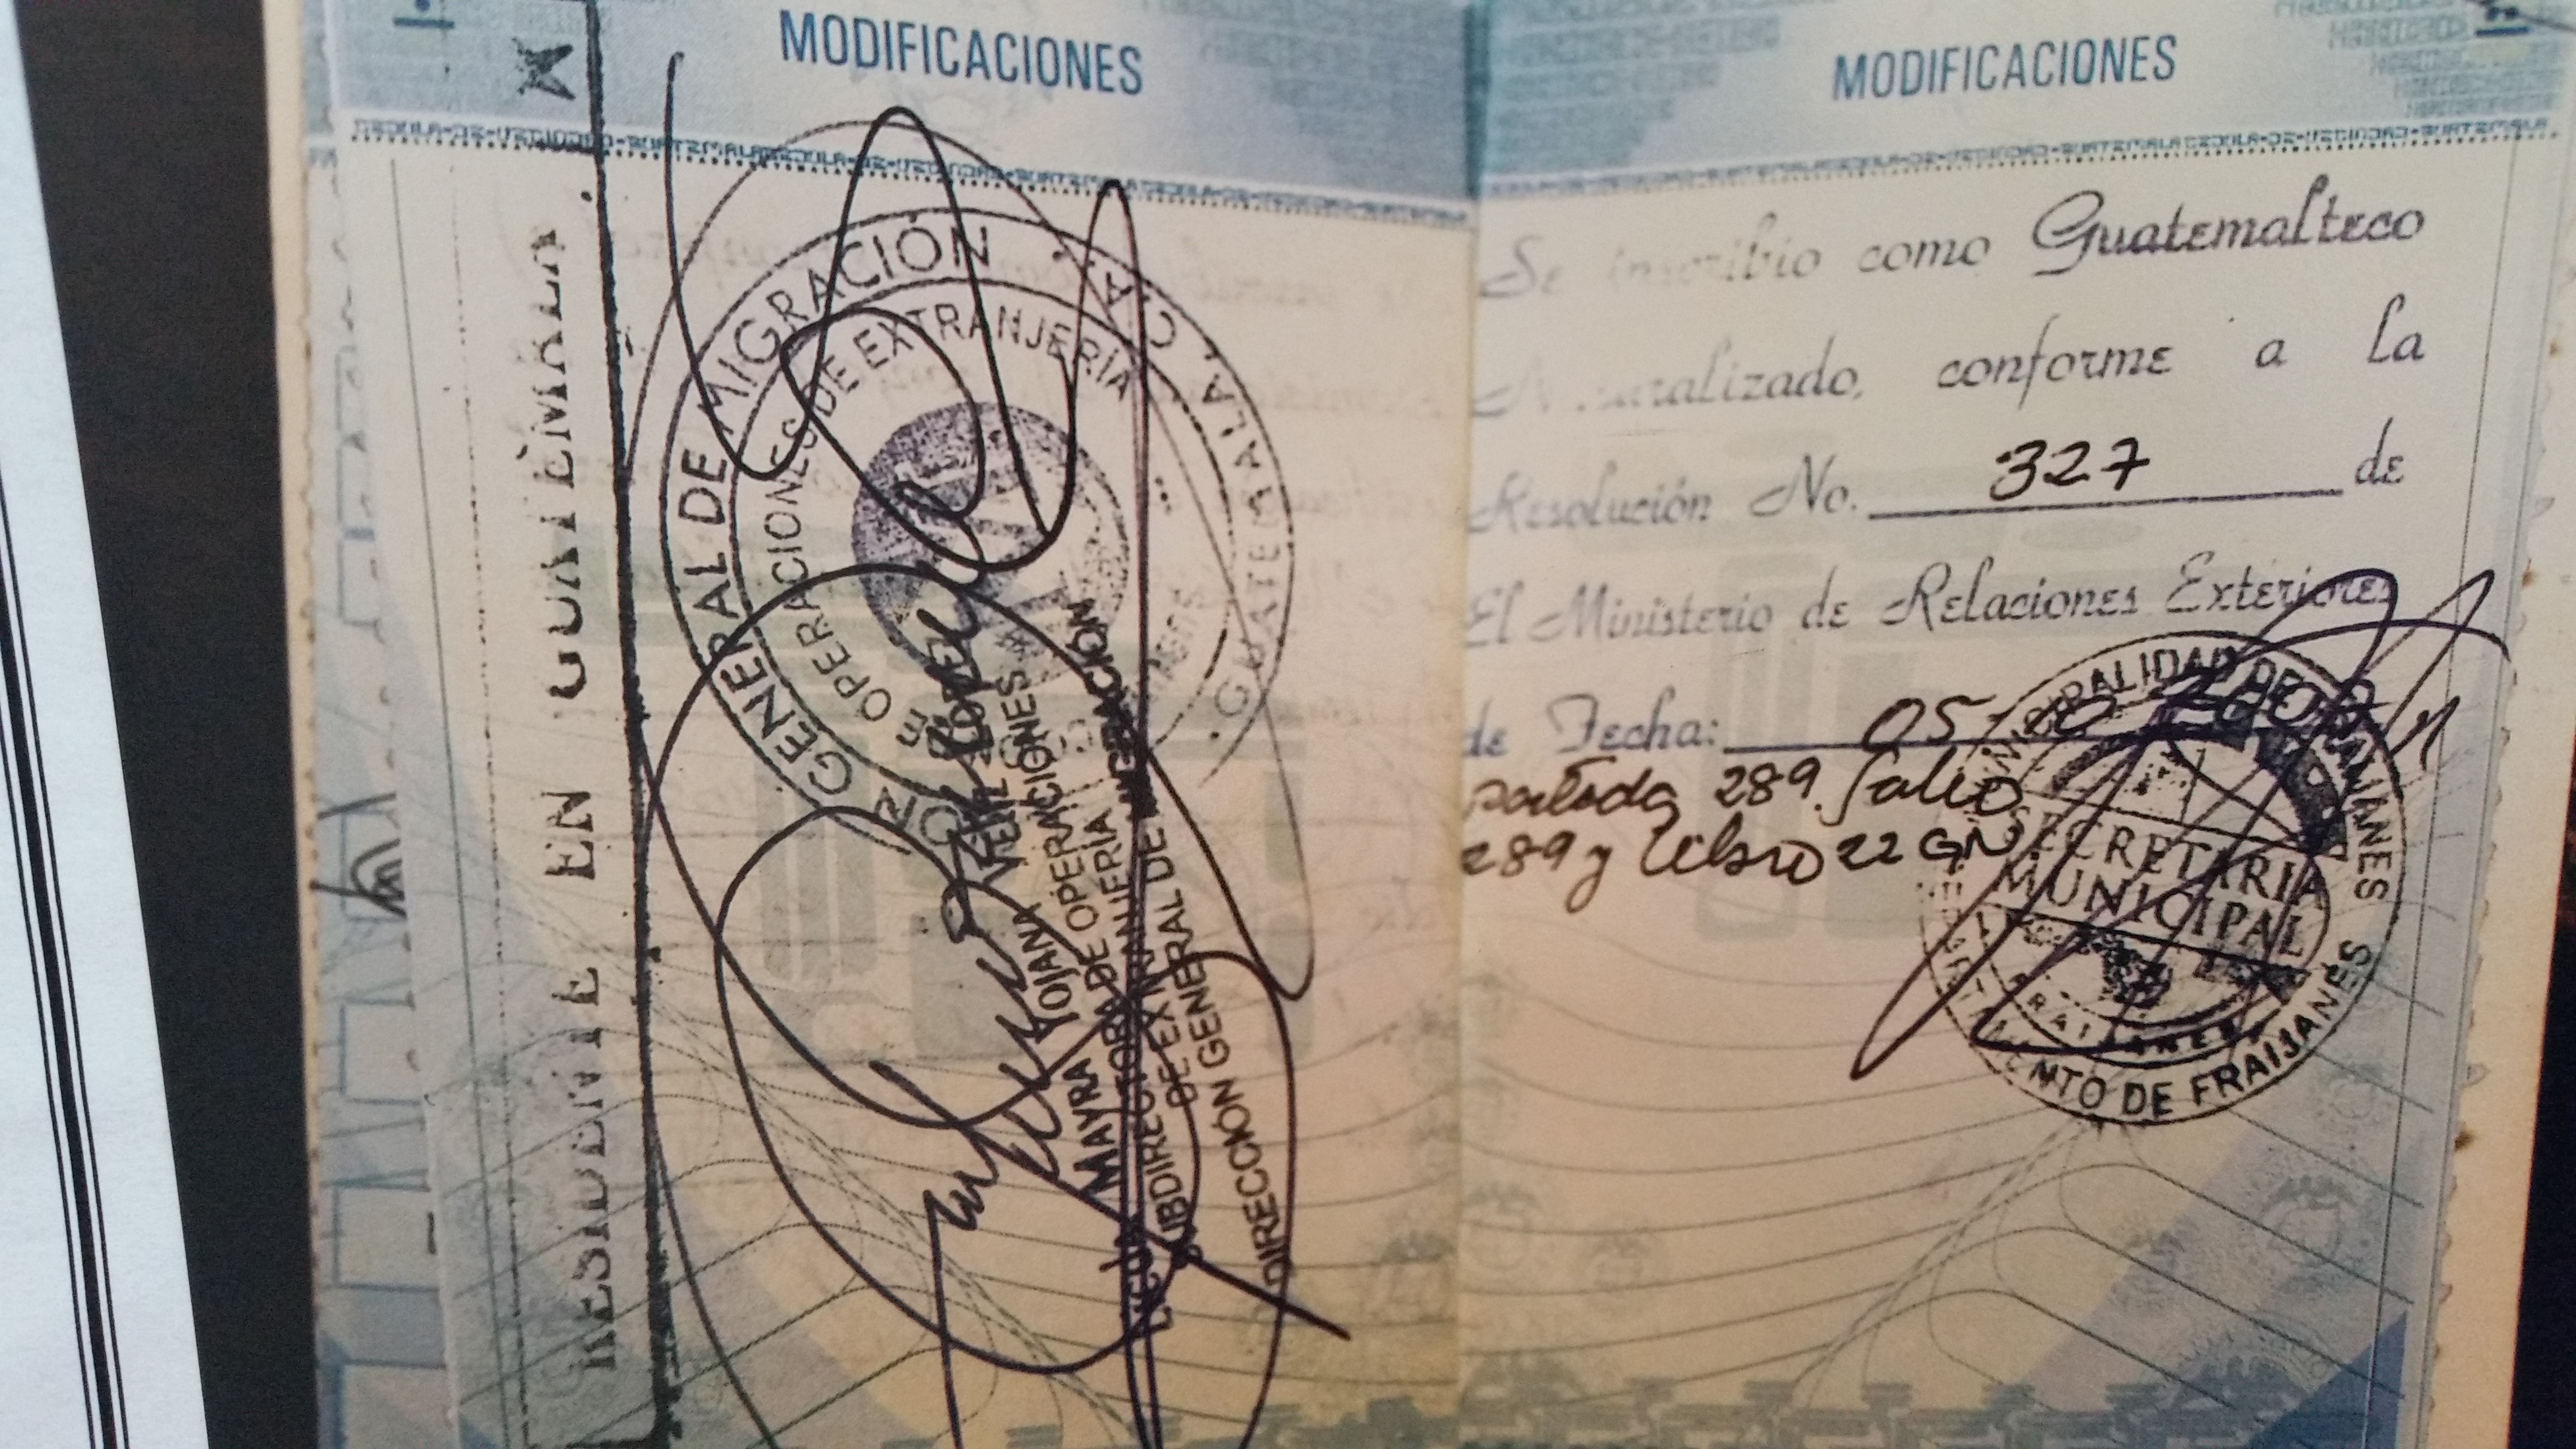 The cedula issued by mayor of Fraijanes with proof of residence signed by Mayra Veliz